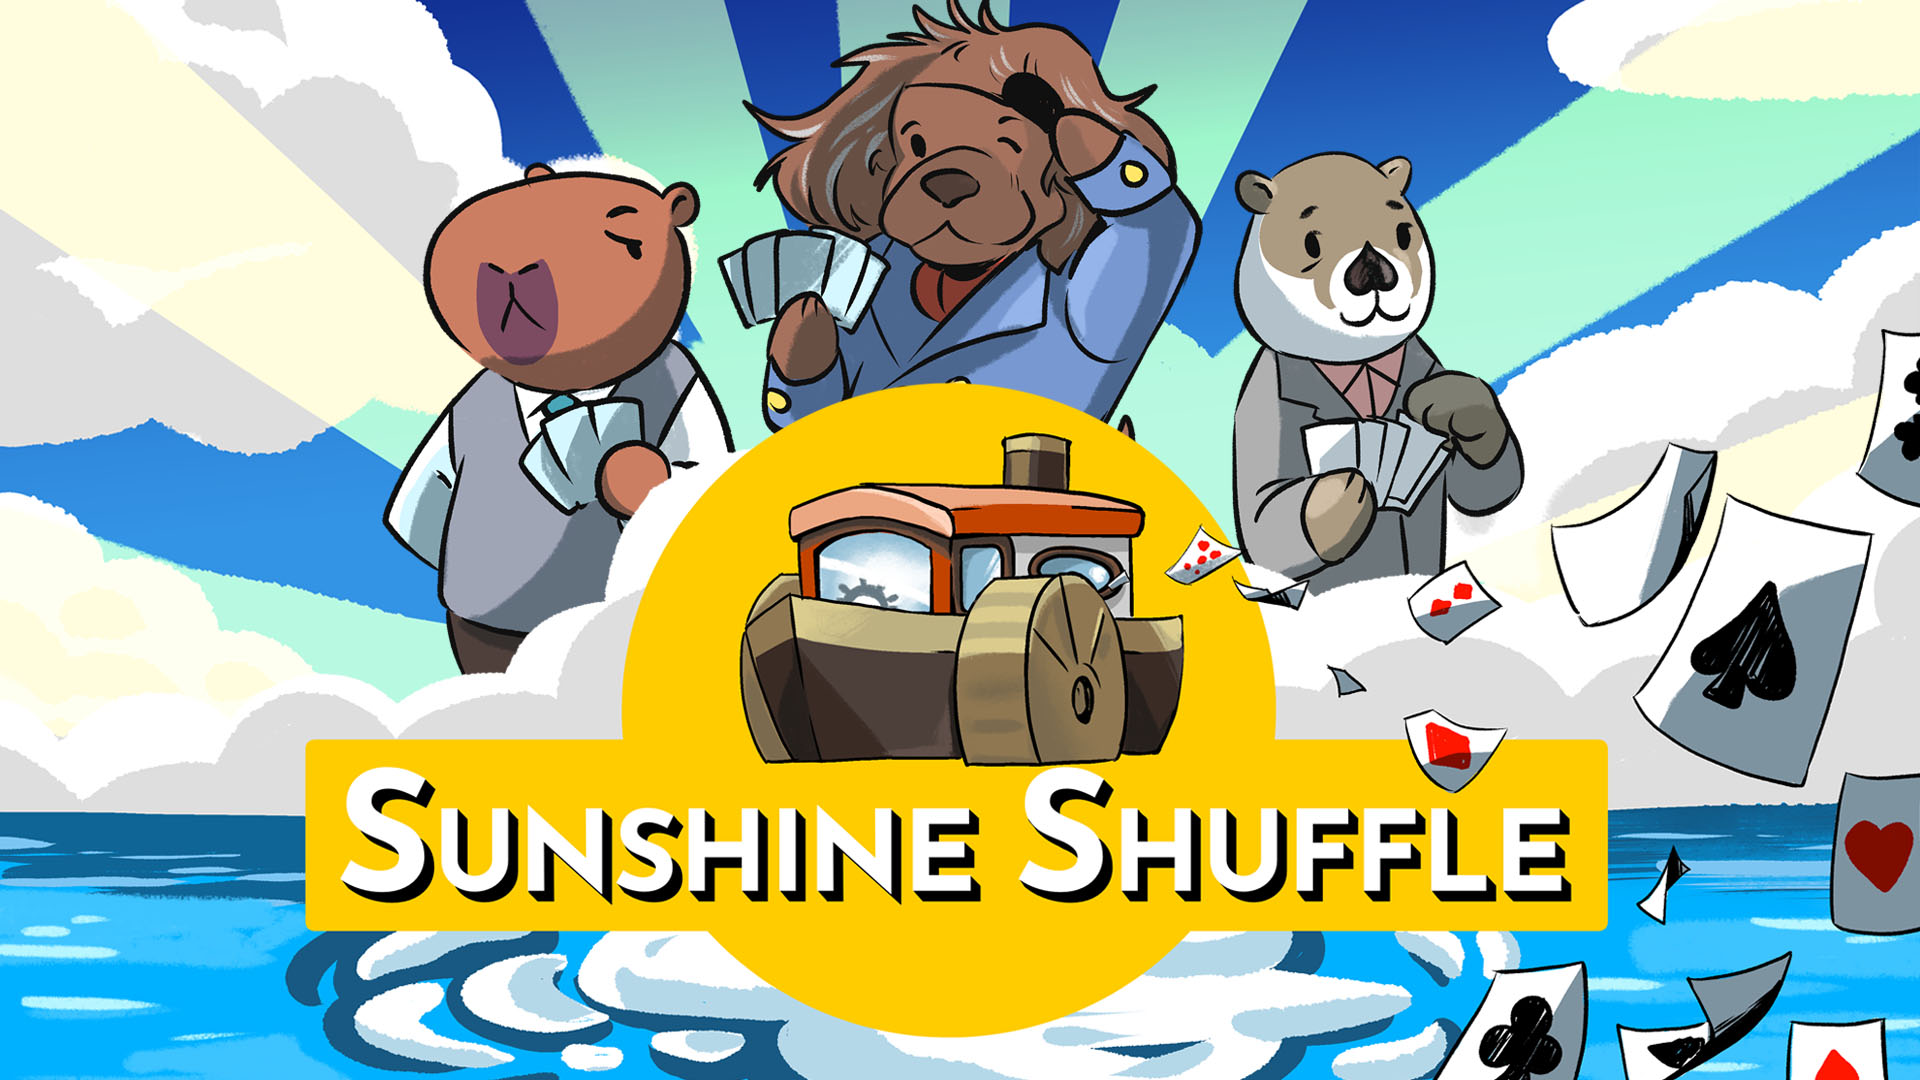 Narrative furry poker adventure Sunshine Shuffle launches this month